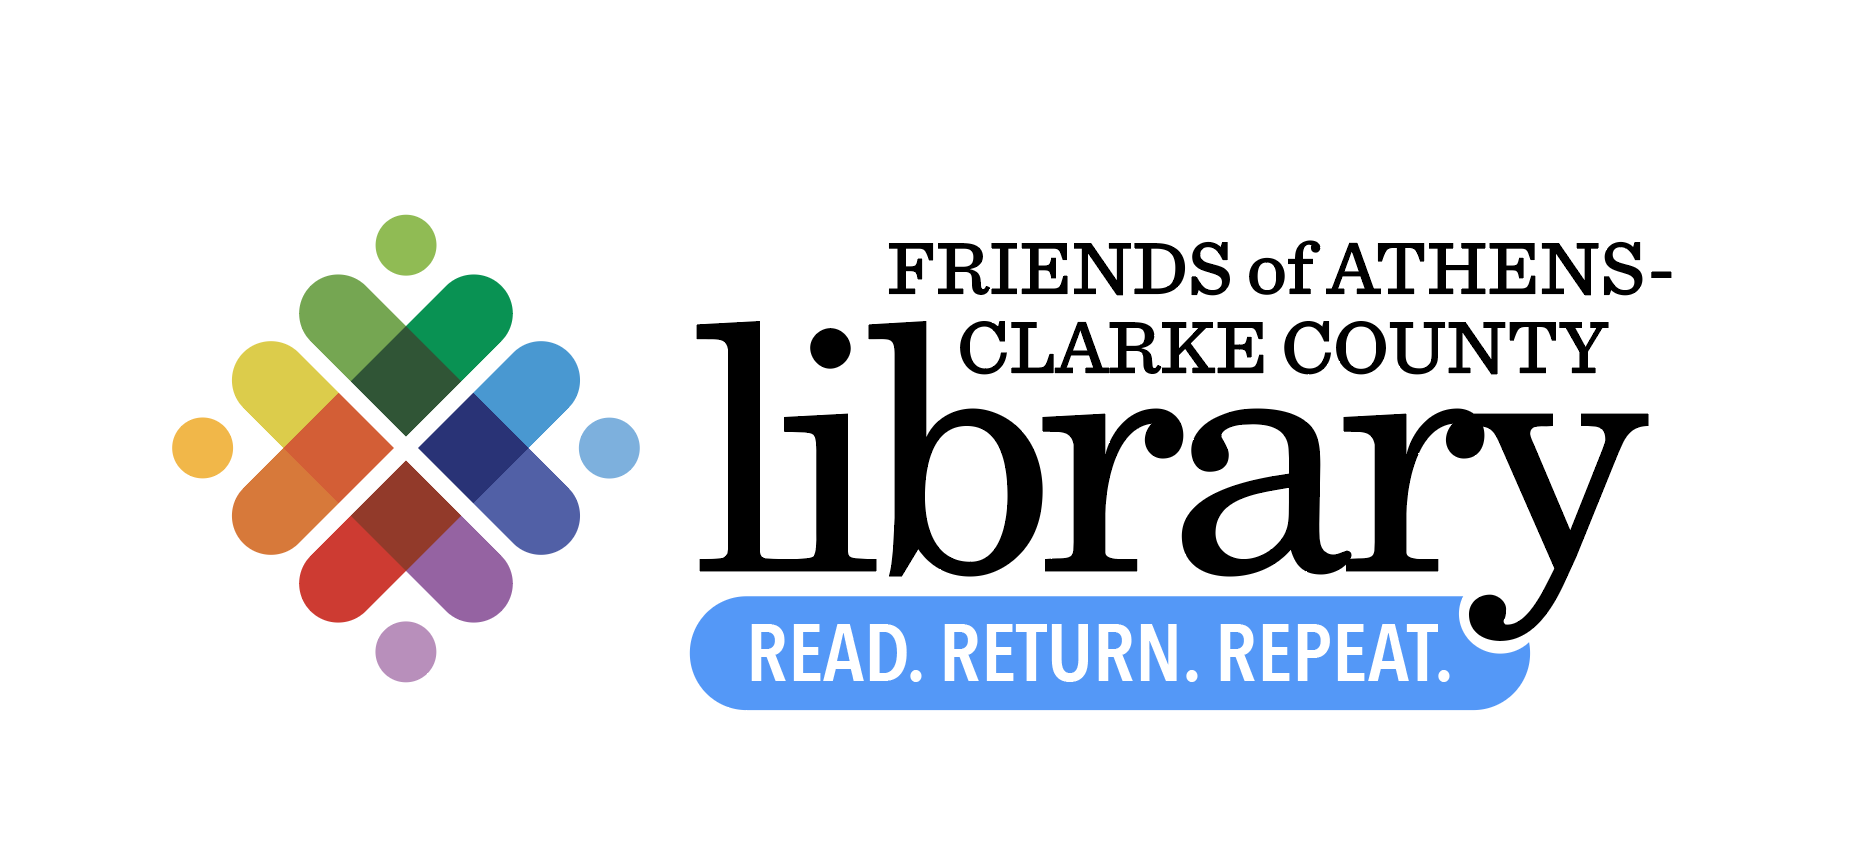 Friends of the Athens-Clarke County Library logo